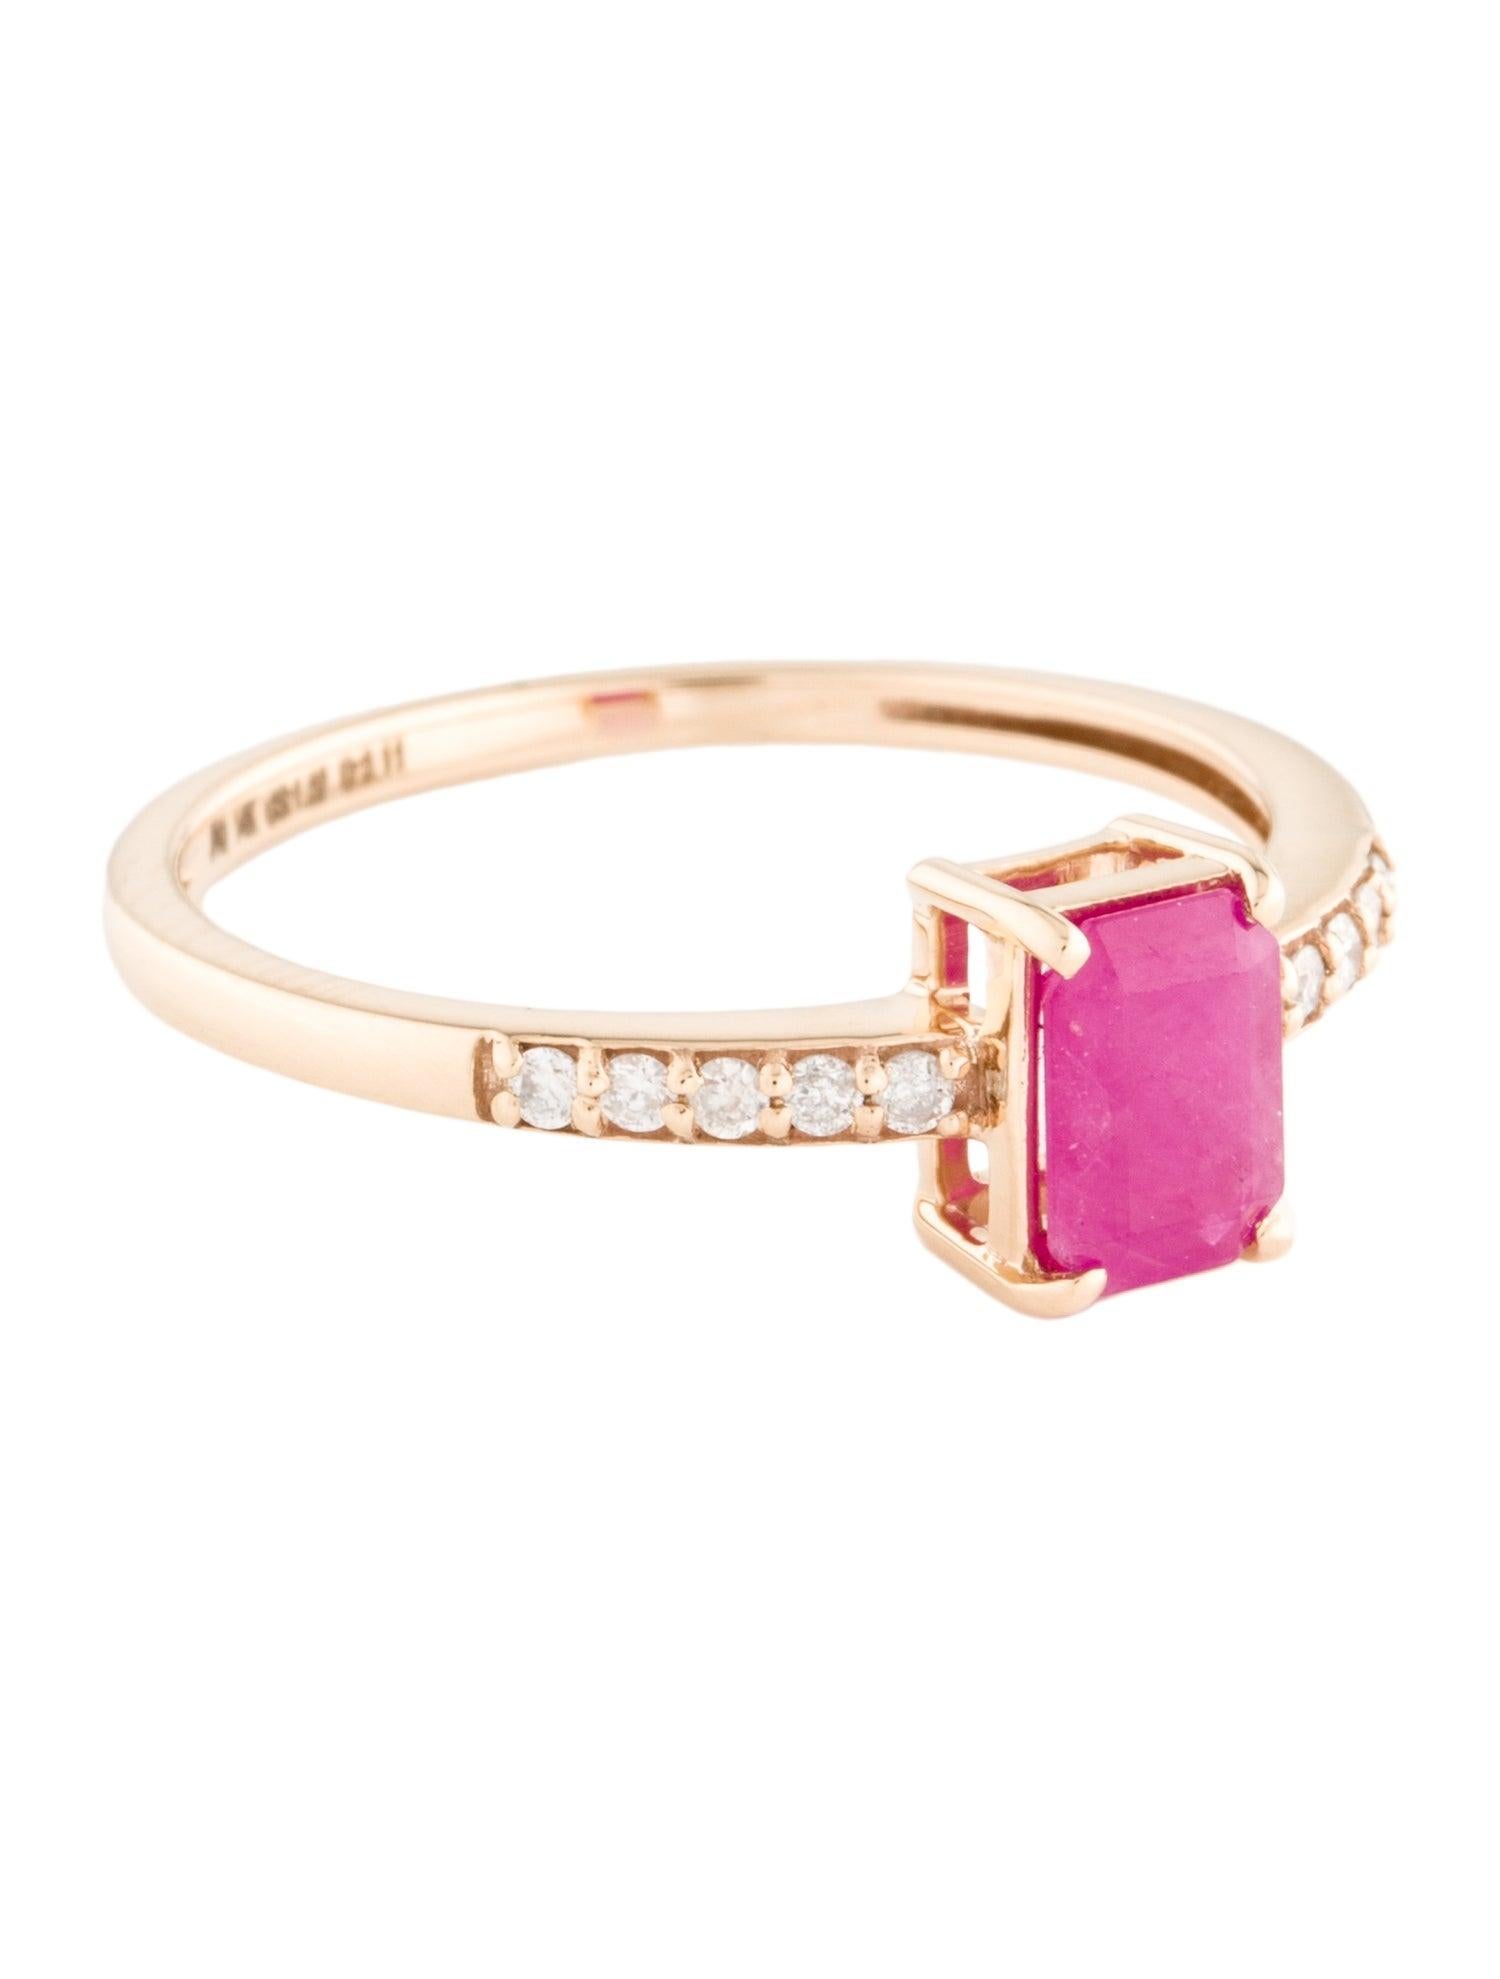 Elevate your style with the enchanting allure of the Blooms of Passion Ruby and Diamond Octagon Ring from Jeweltique. Immerse yourself in the vivid beauty of nature's passionate blooms, captured in this exquisite piece crafted with precision and